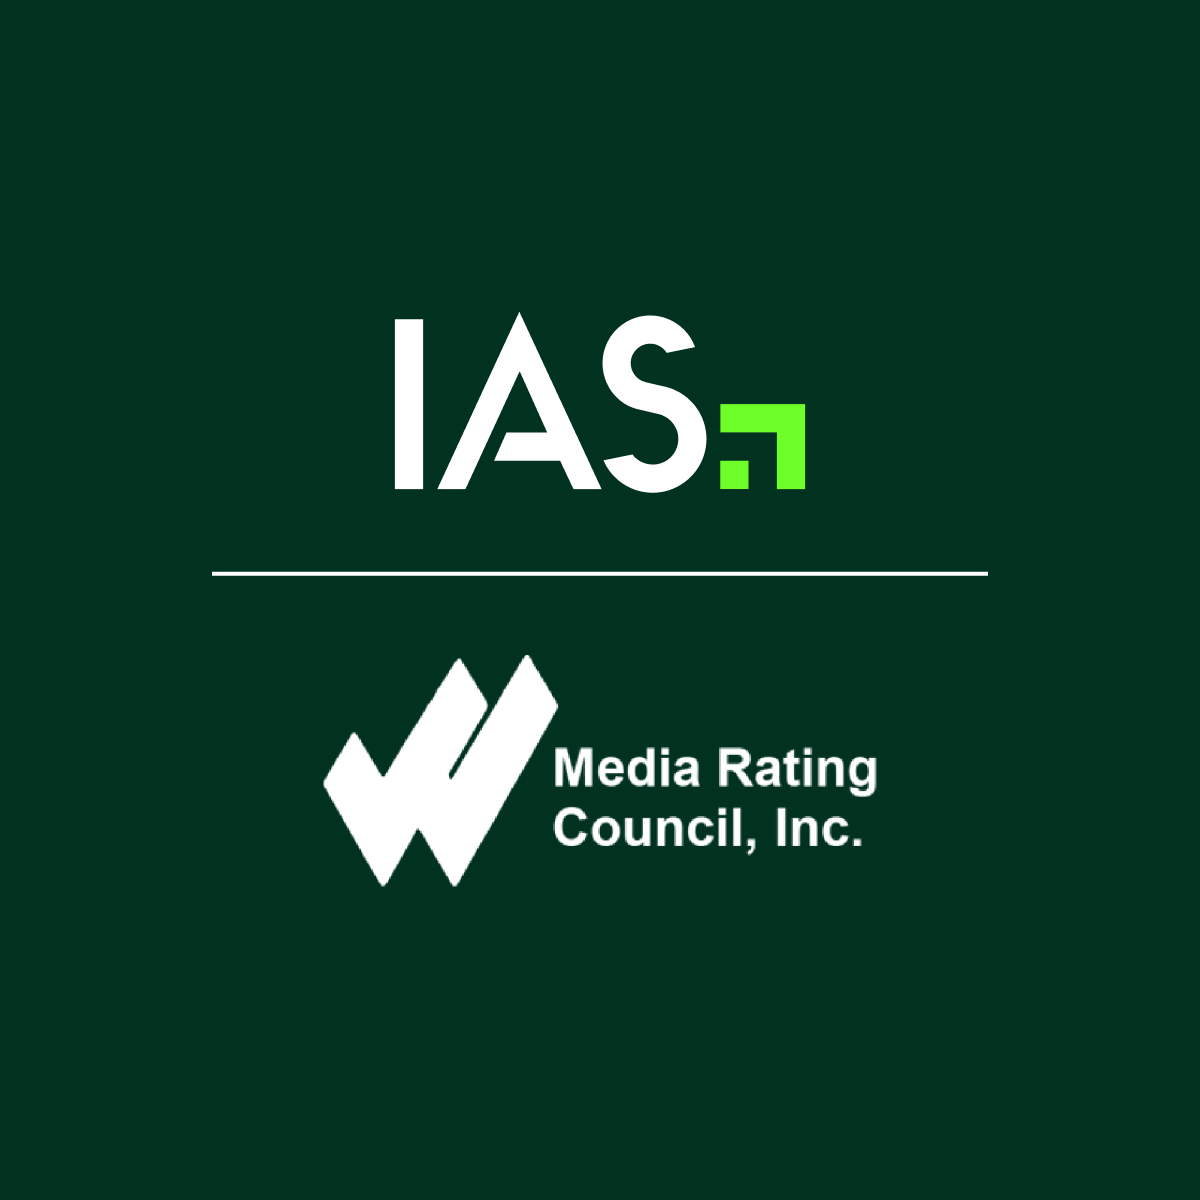 IAS earns MRC accreditation for SIVT measurement in the Connected Television environment.